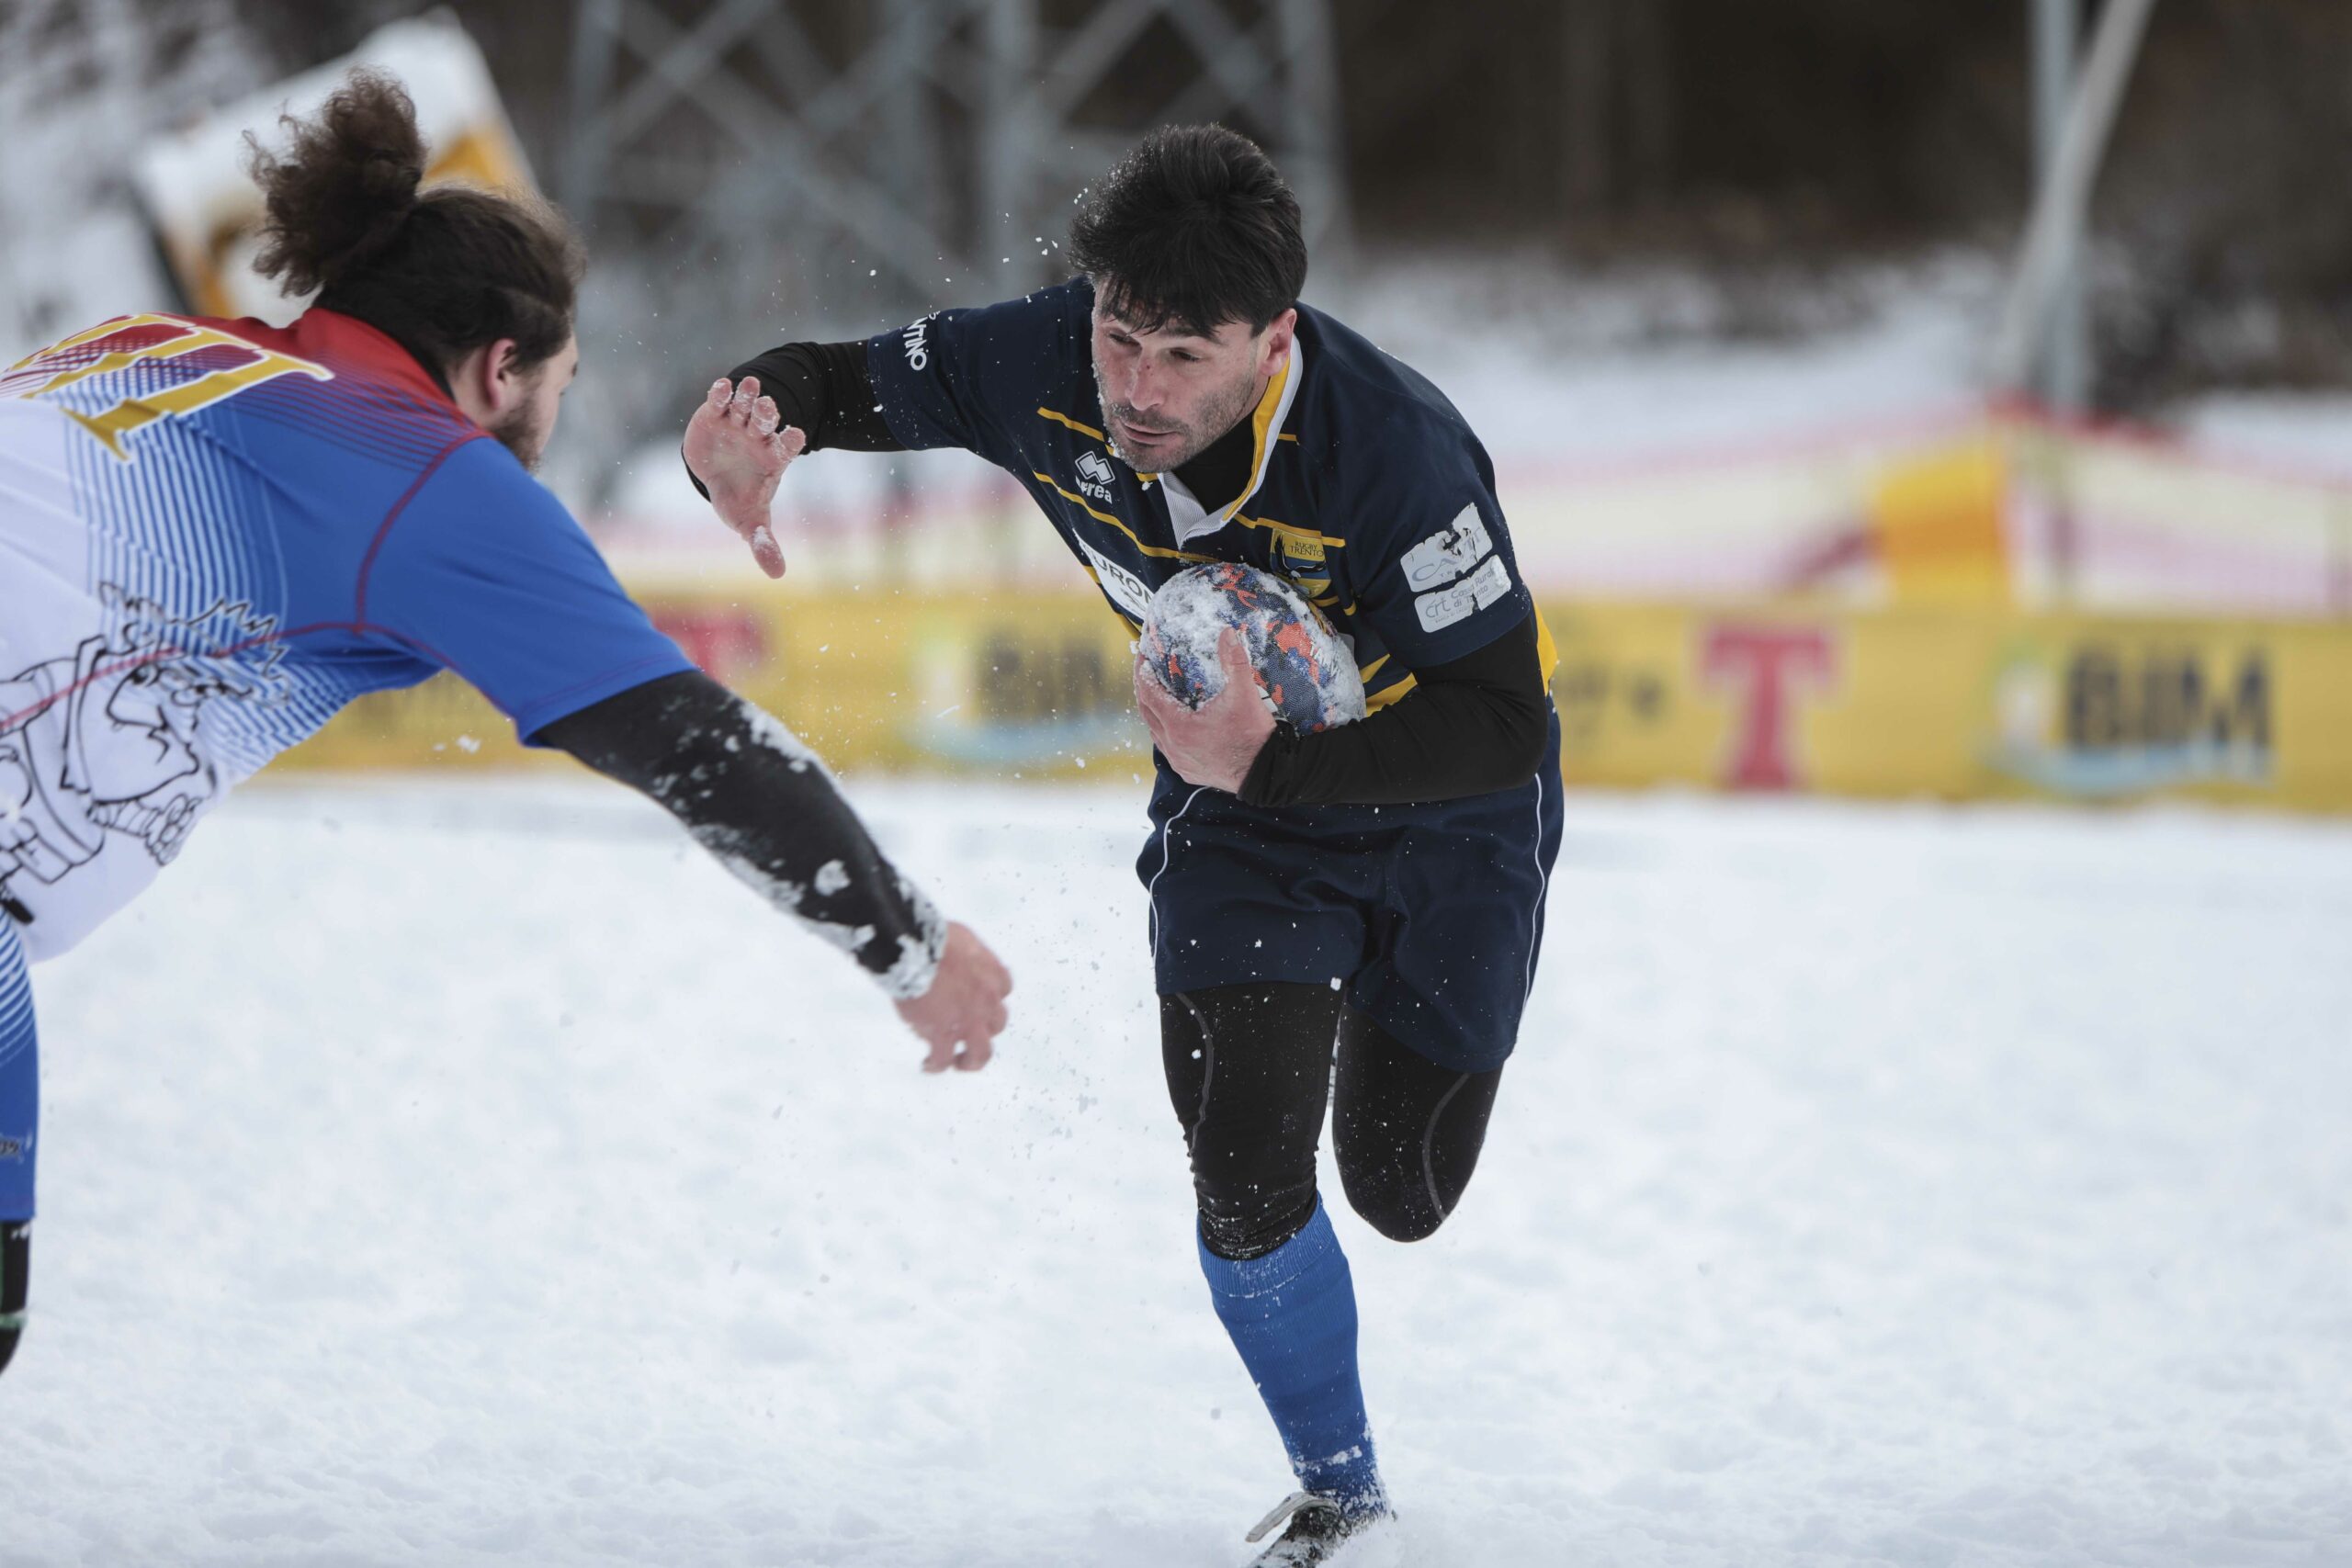 snow rugby